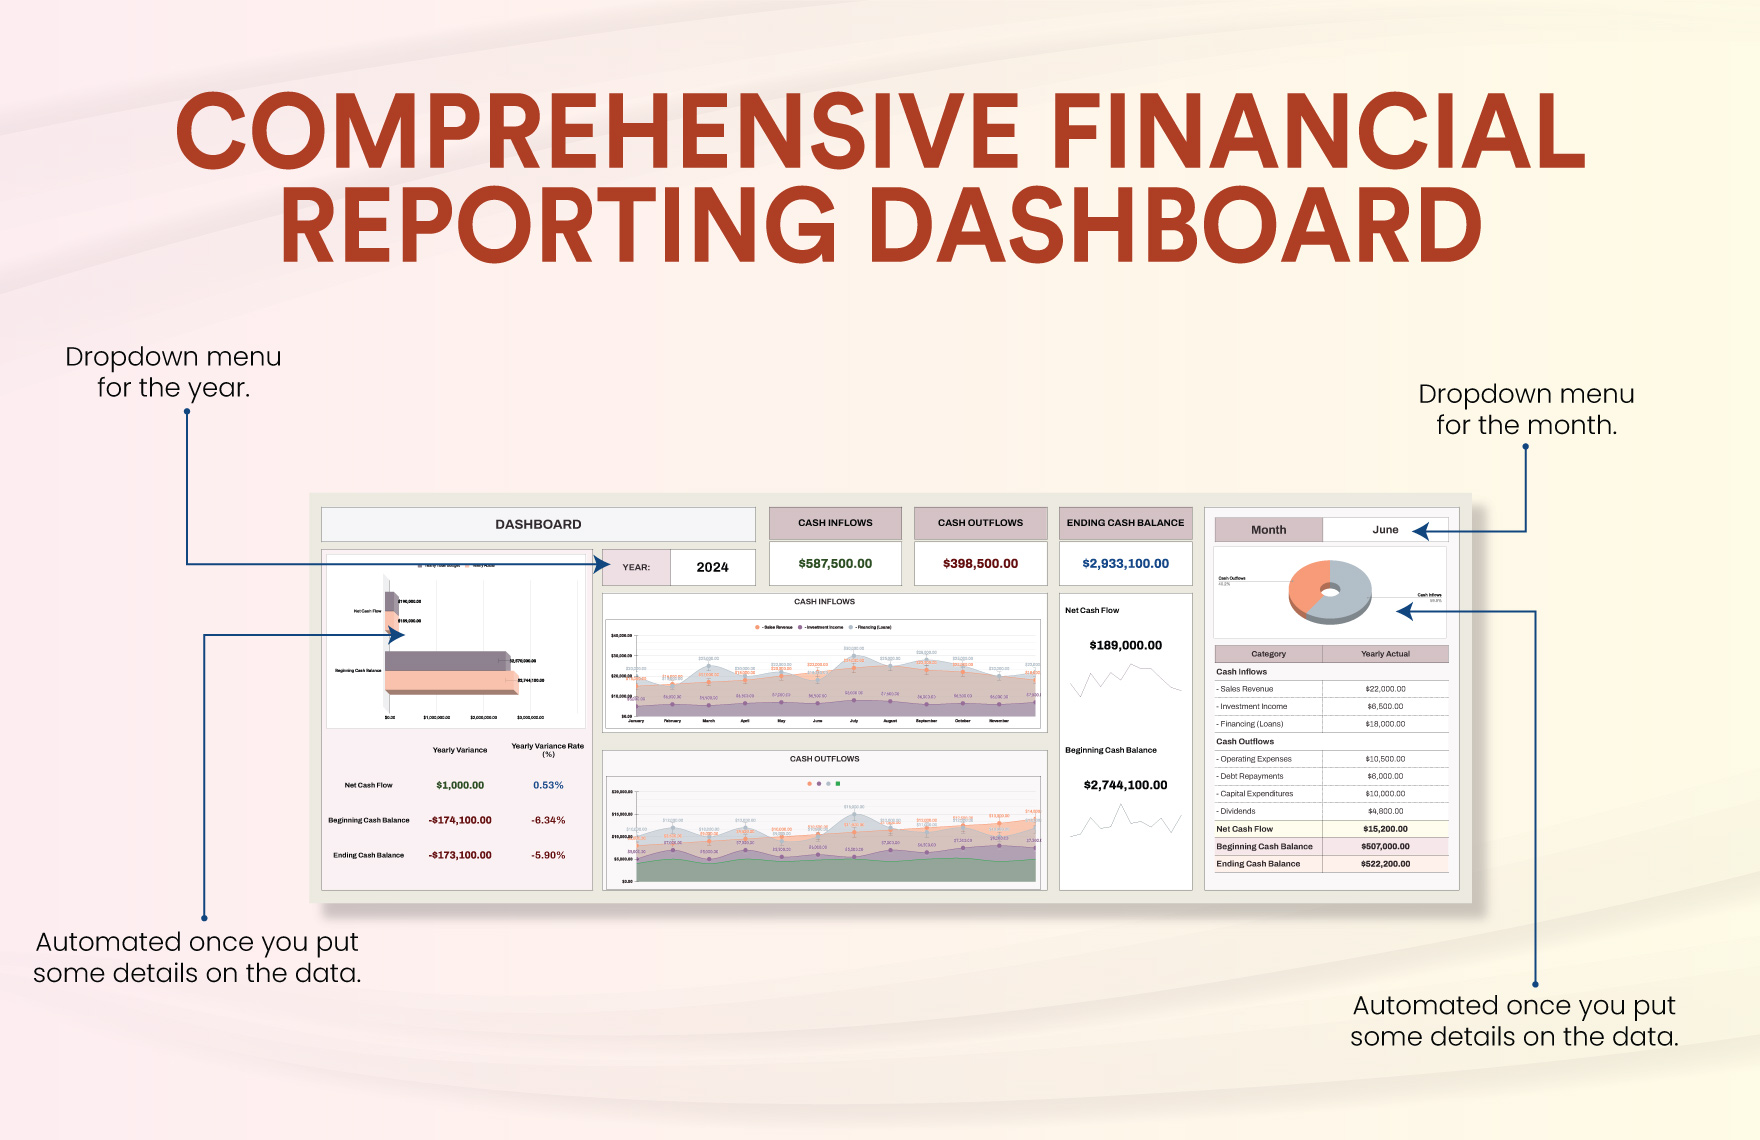 Comprehensive Financial Reporting Dashboard Template